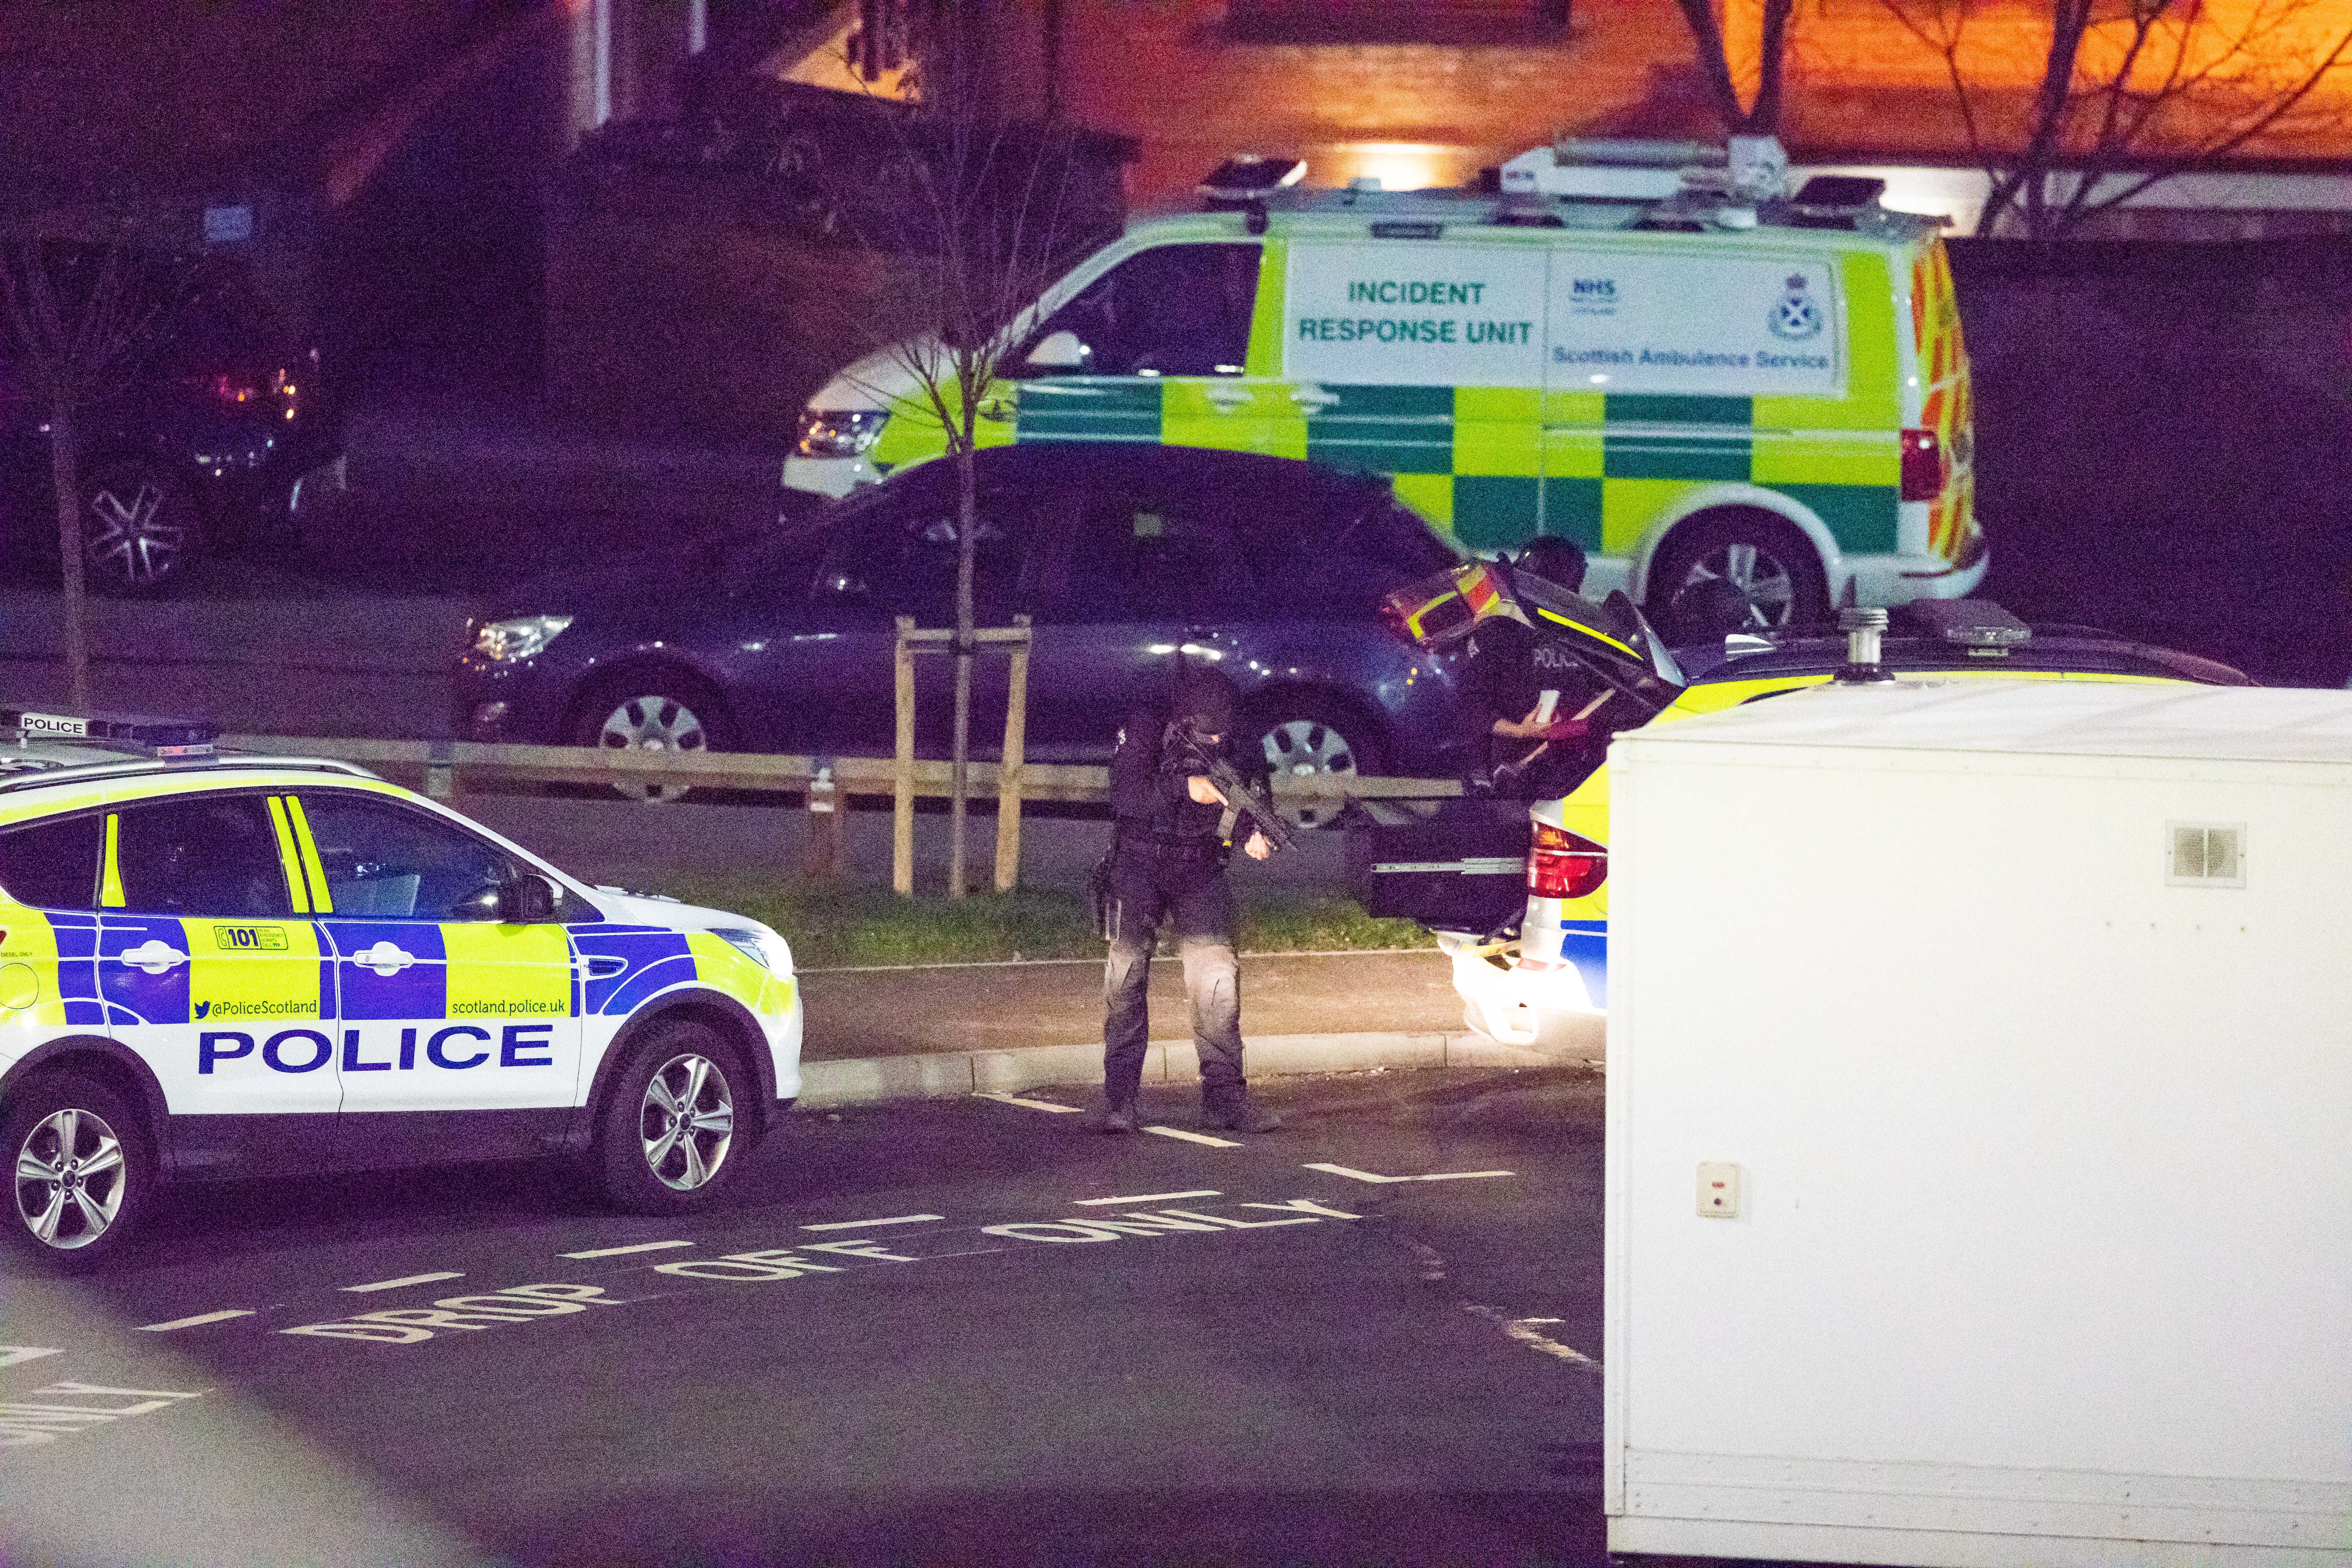 The incident on Ann Street sparked an armed police response.